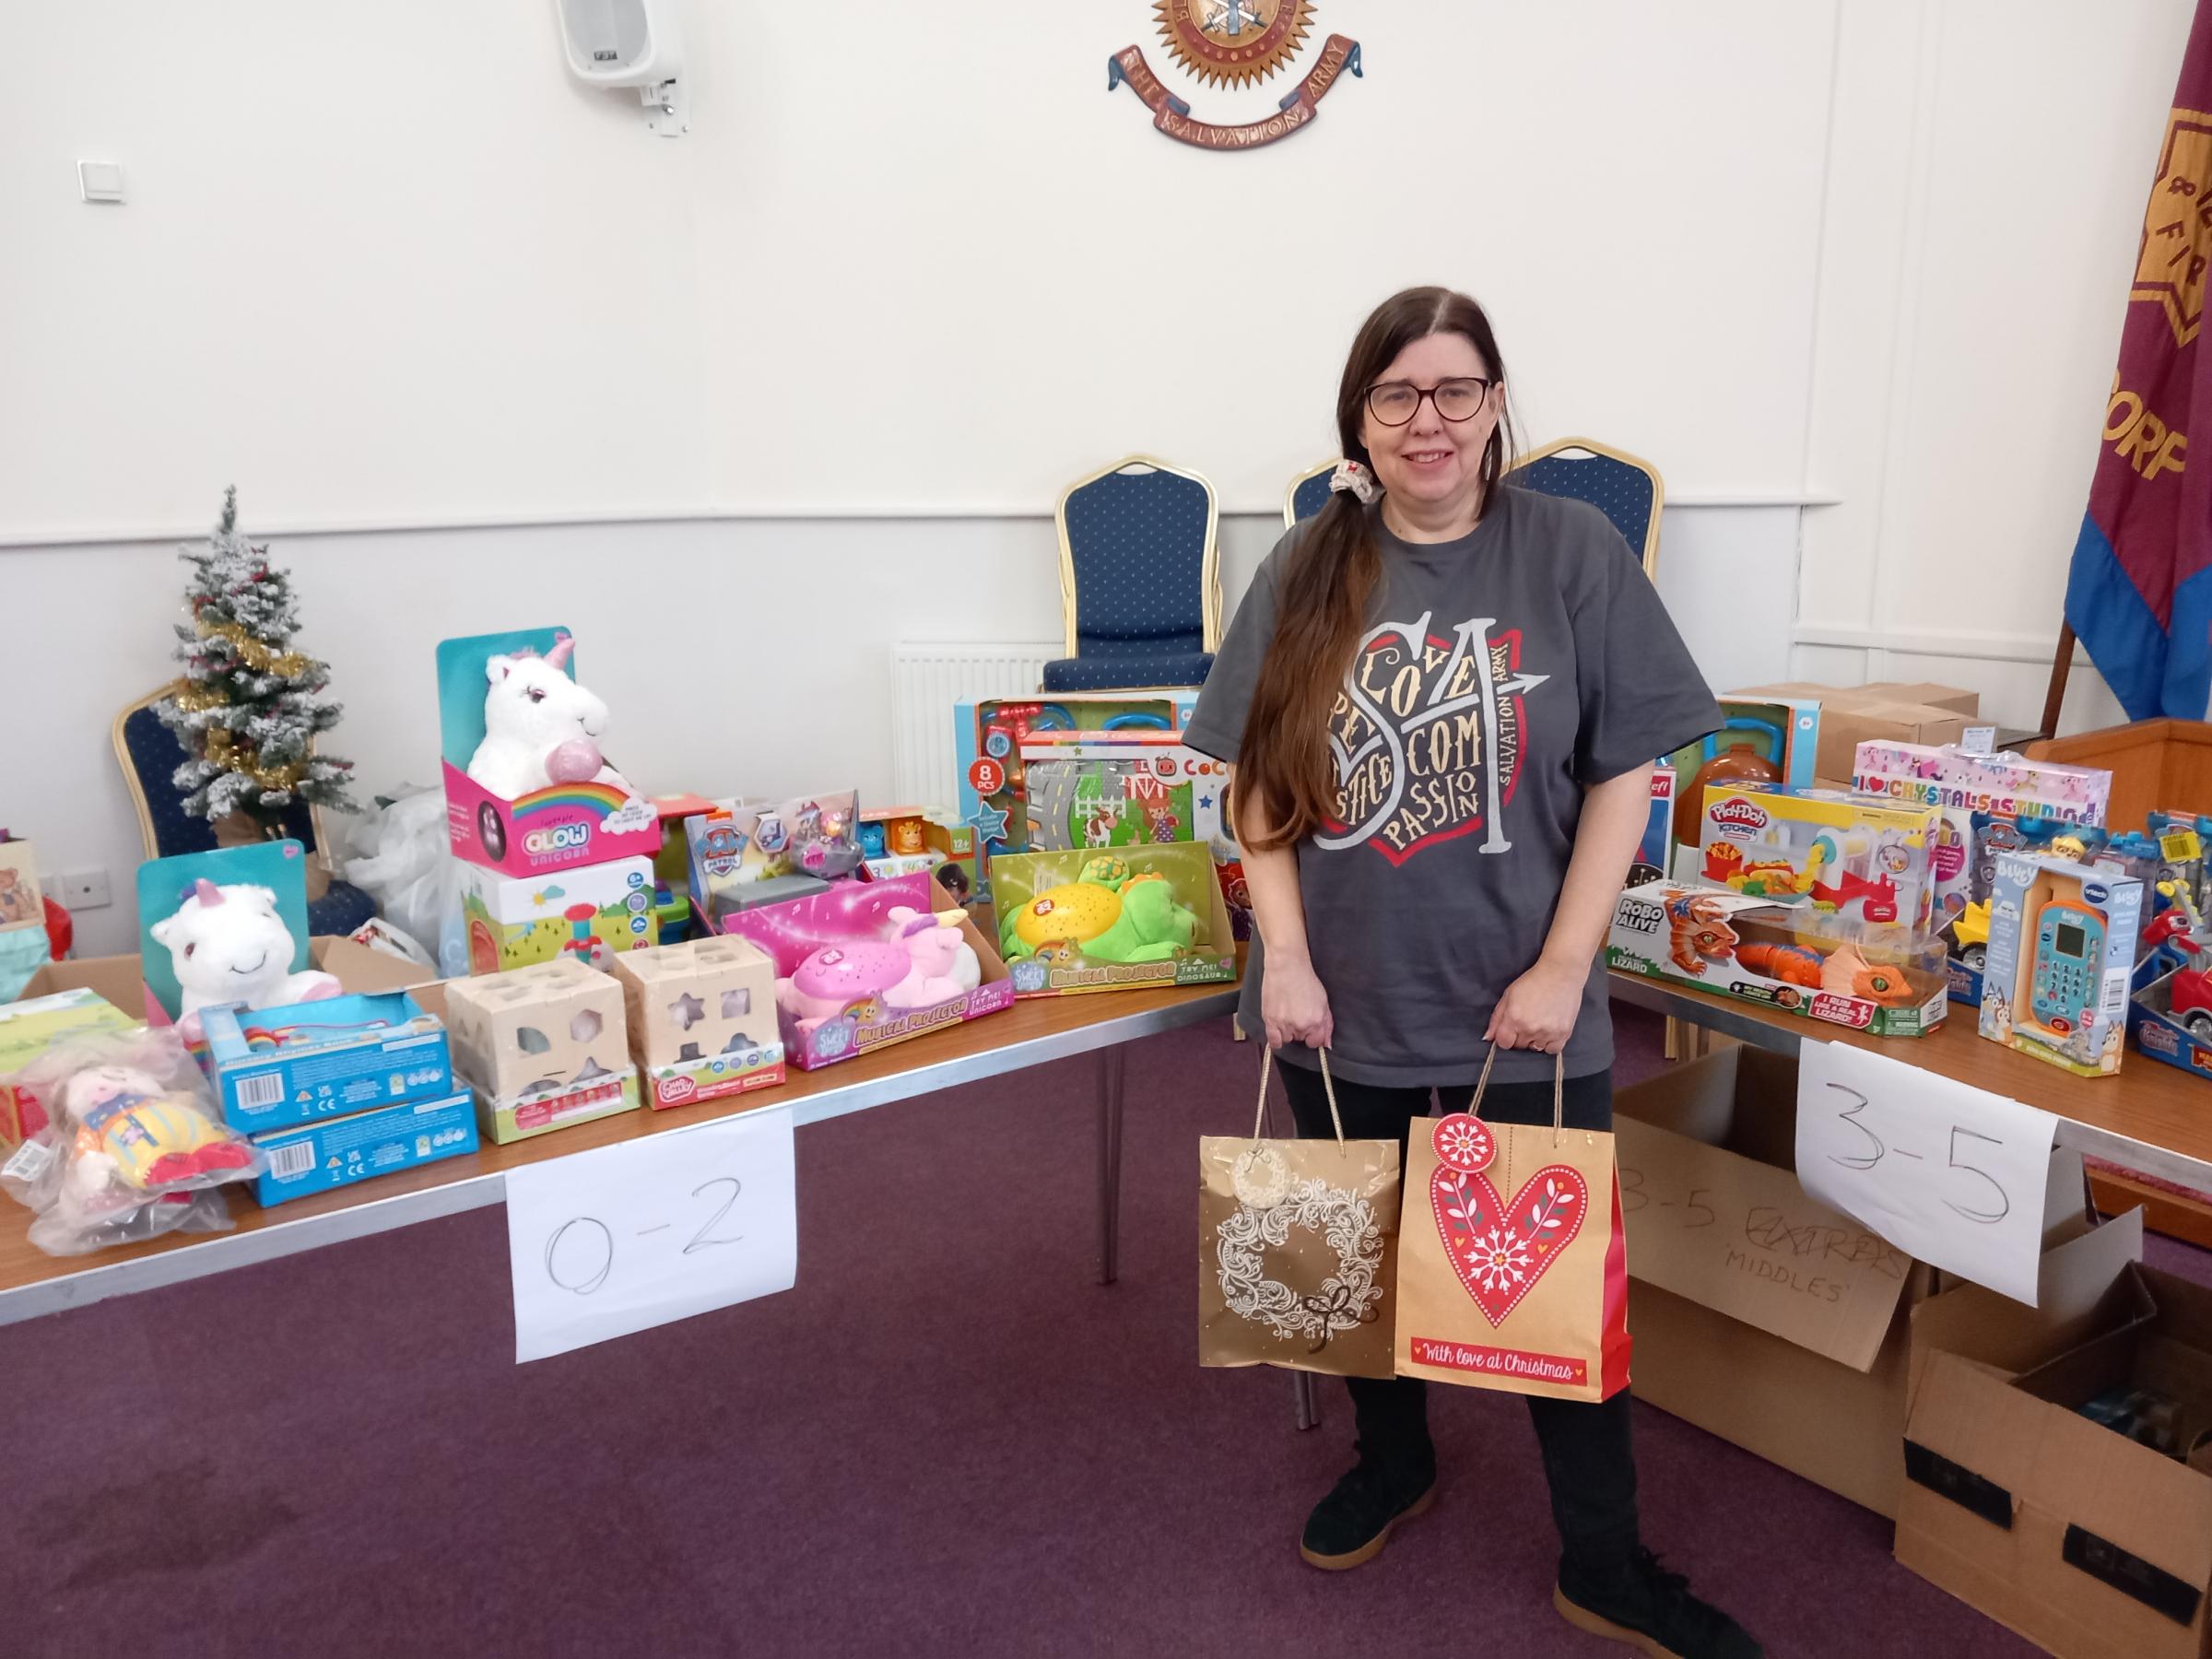 Appeal launched to ensure struggling families have toys this Christmas